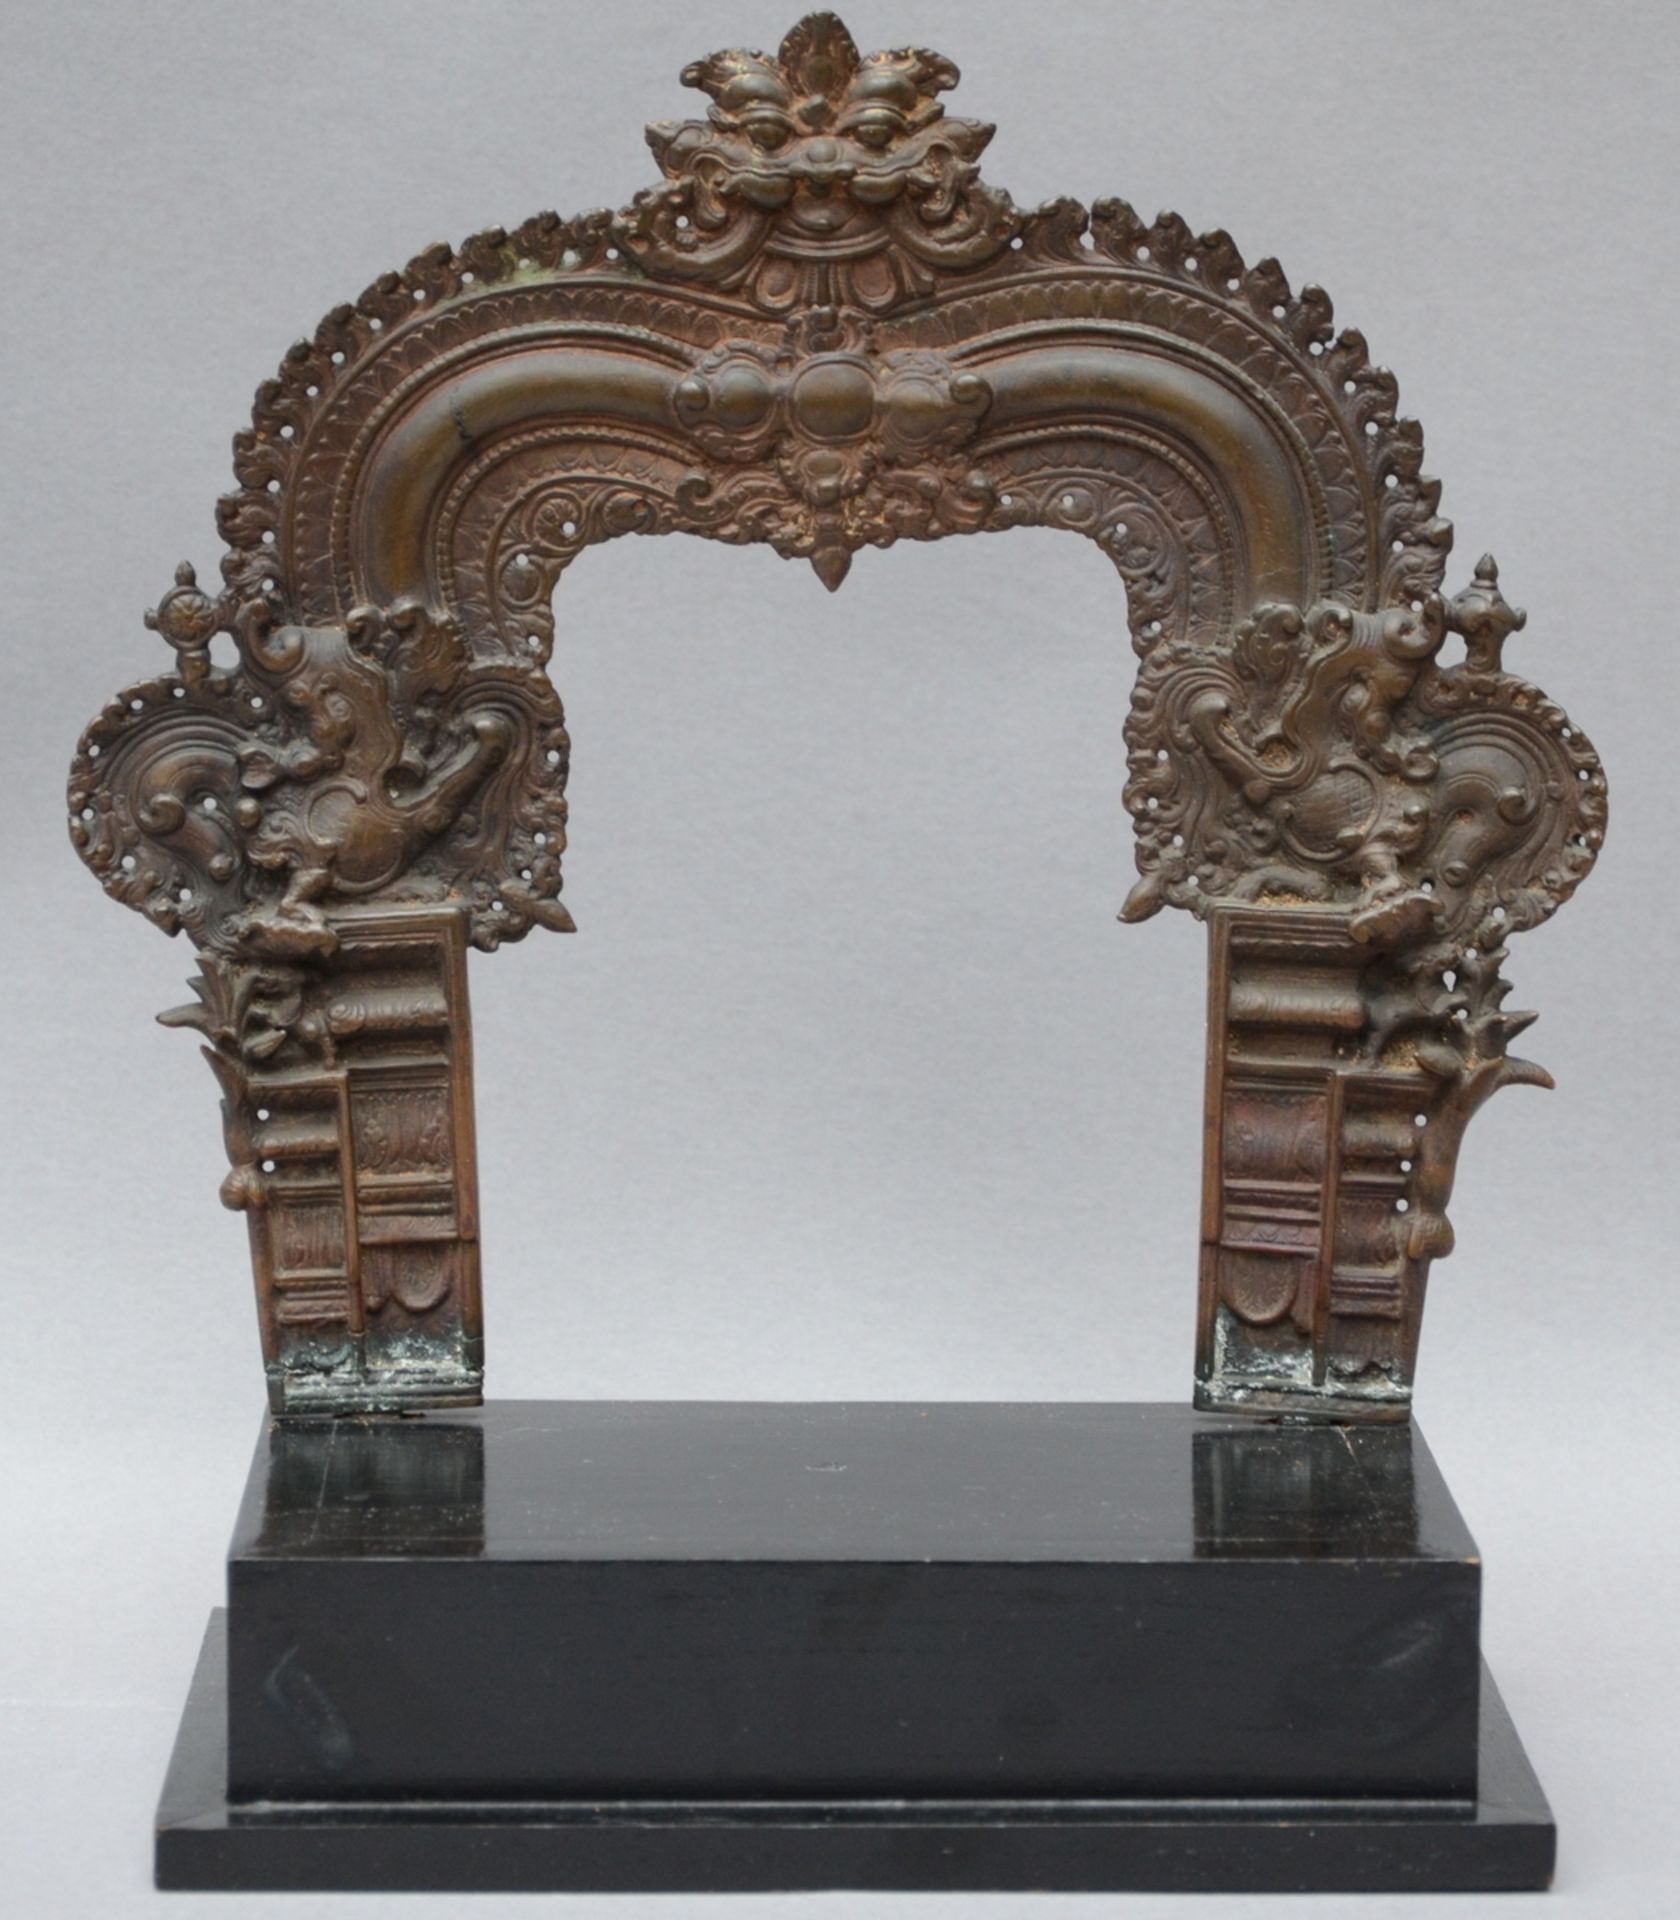 Indian bronze bow, South India 17th century (23x25cm)